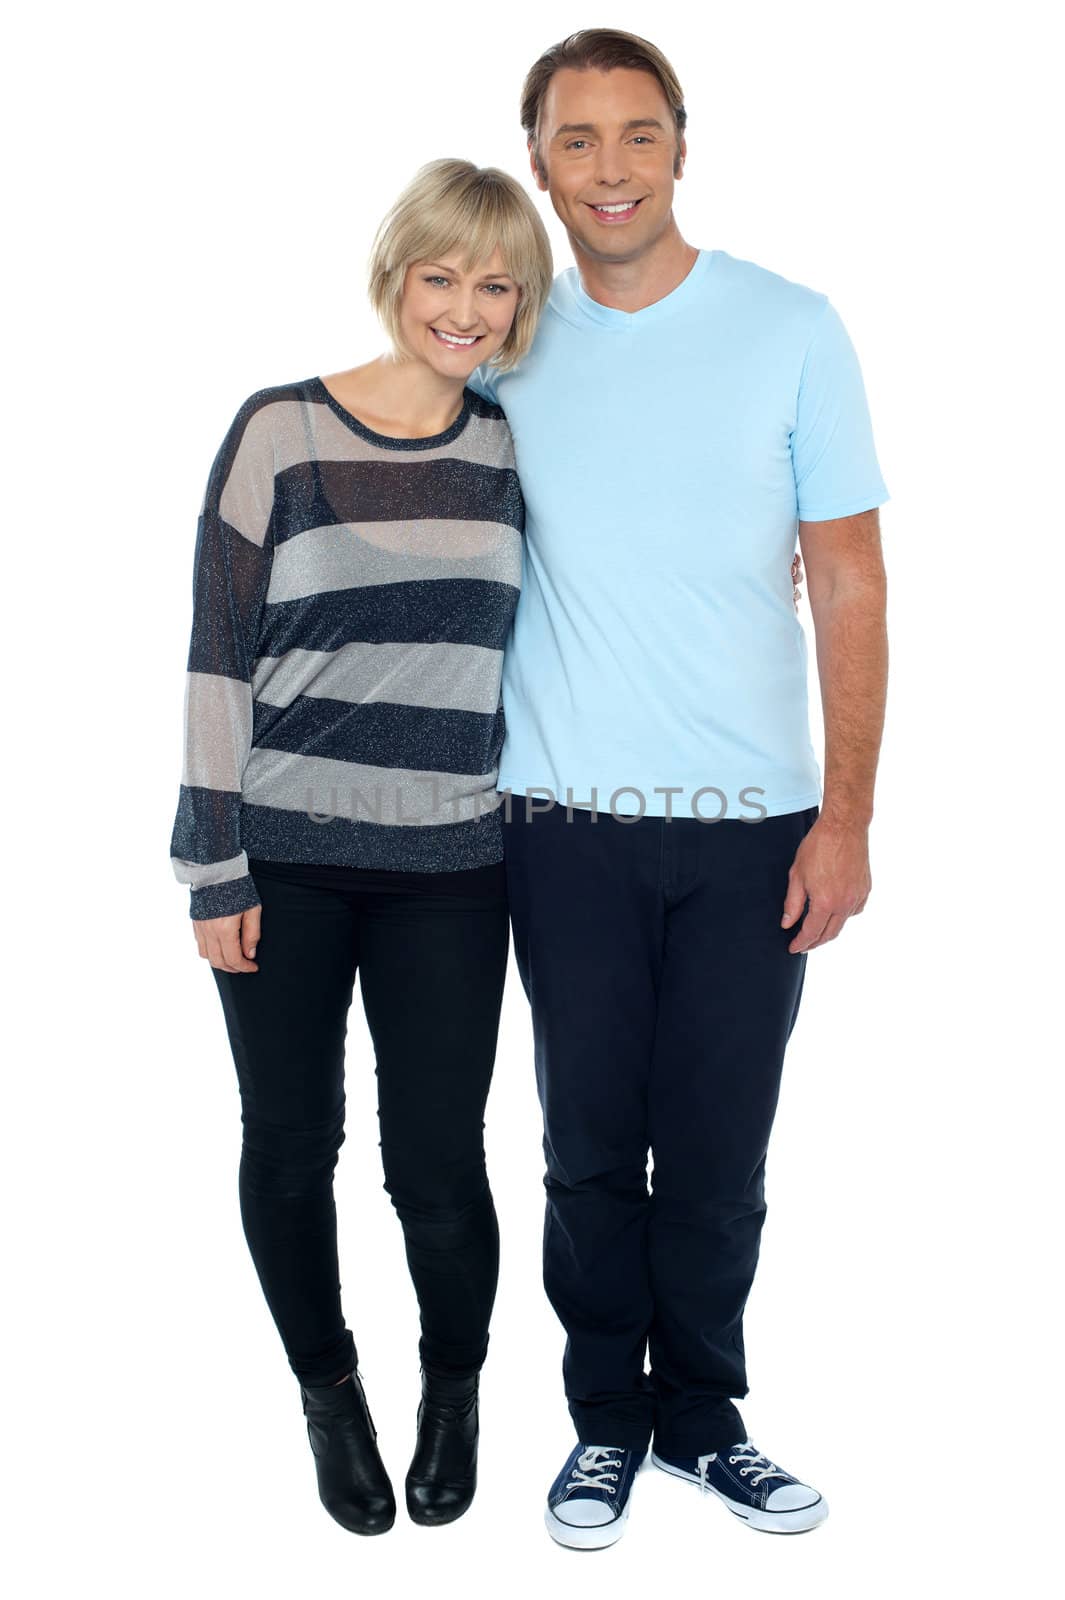 Attractive middle aged love couple. Full length studio shot on white background.